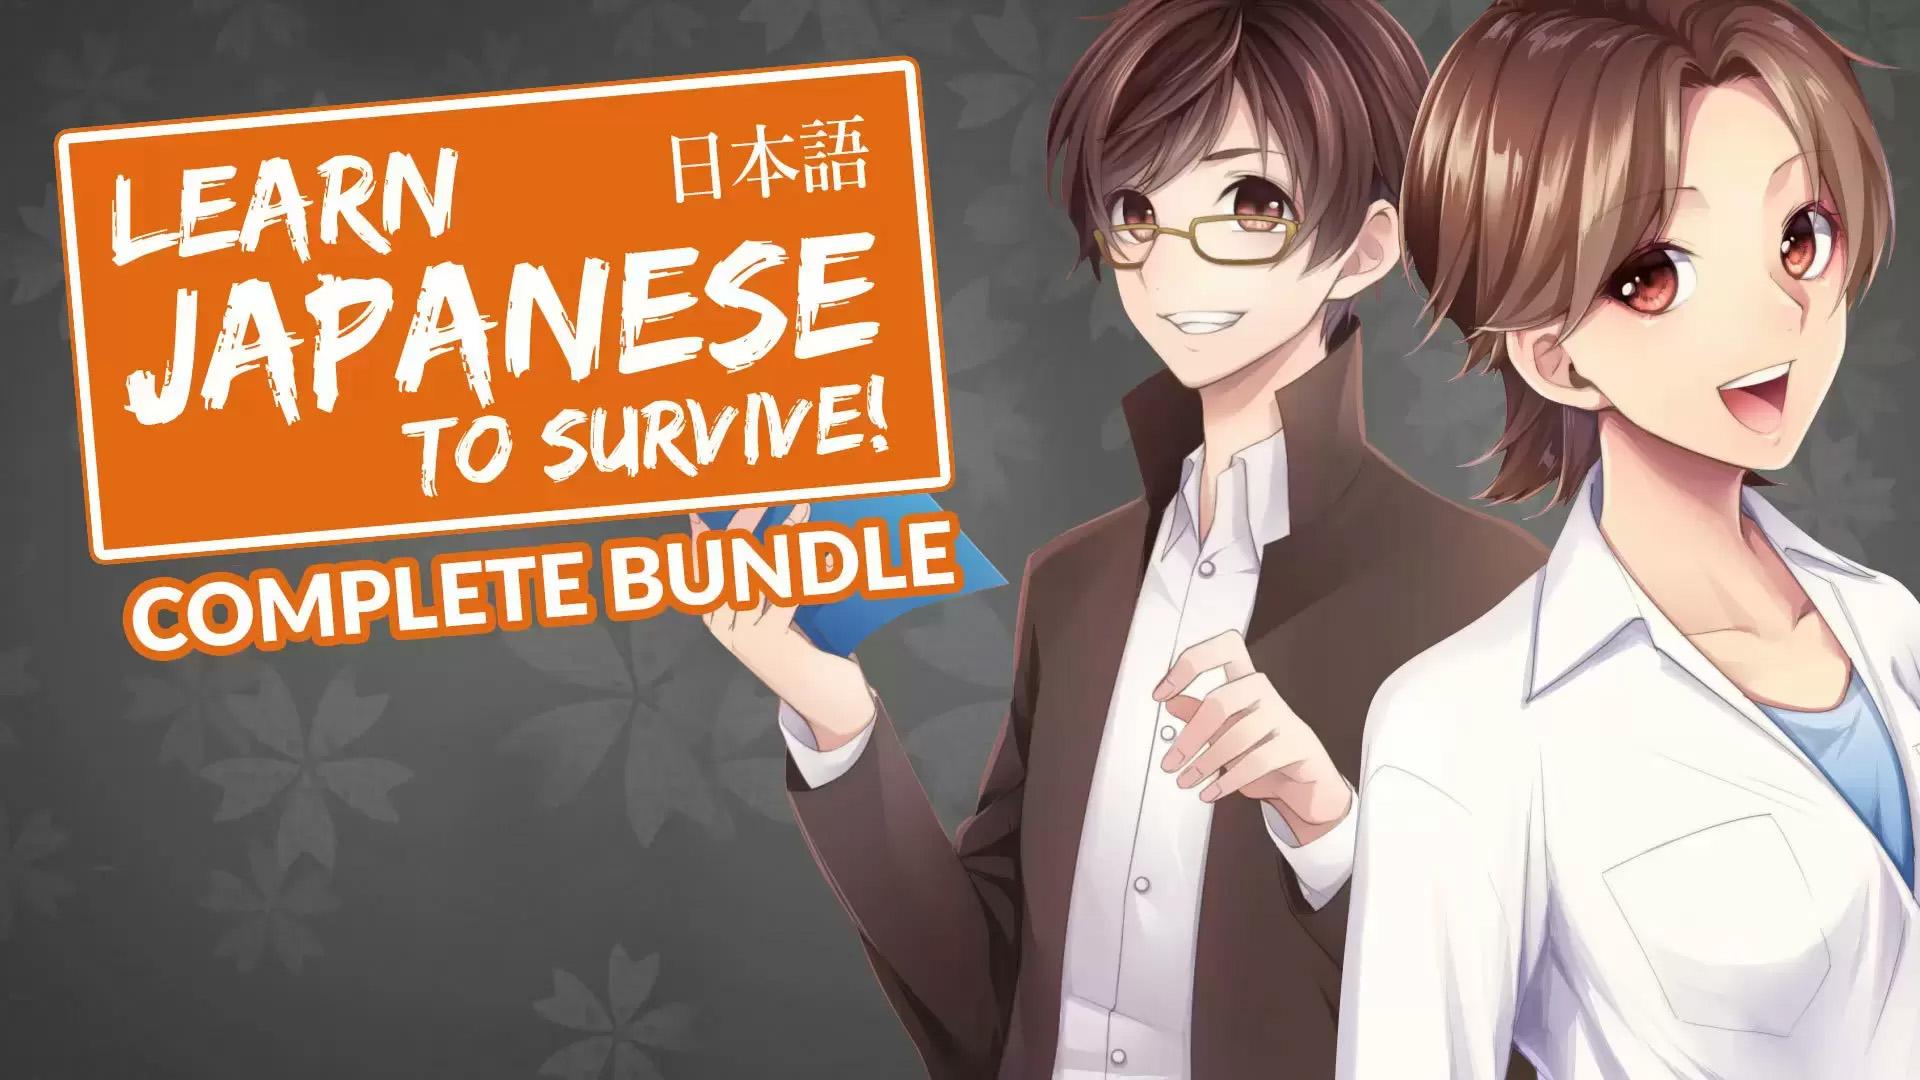 Learn Japanese To Survive Complete Set Download for $2.99